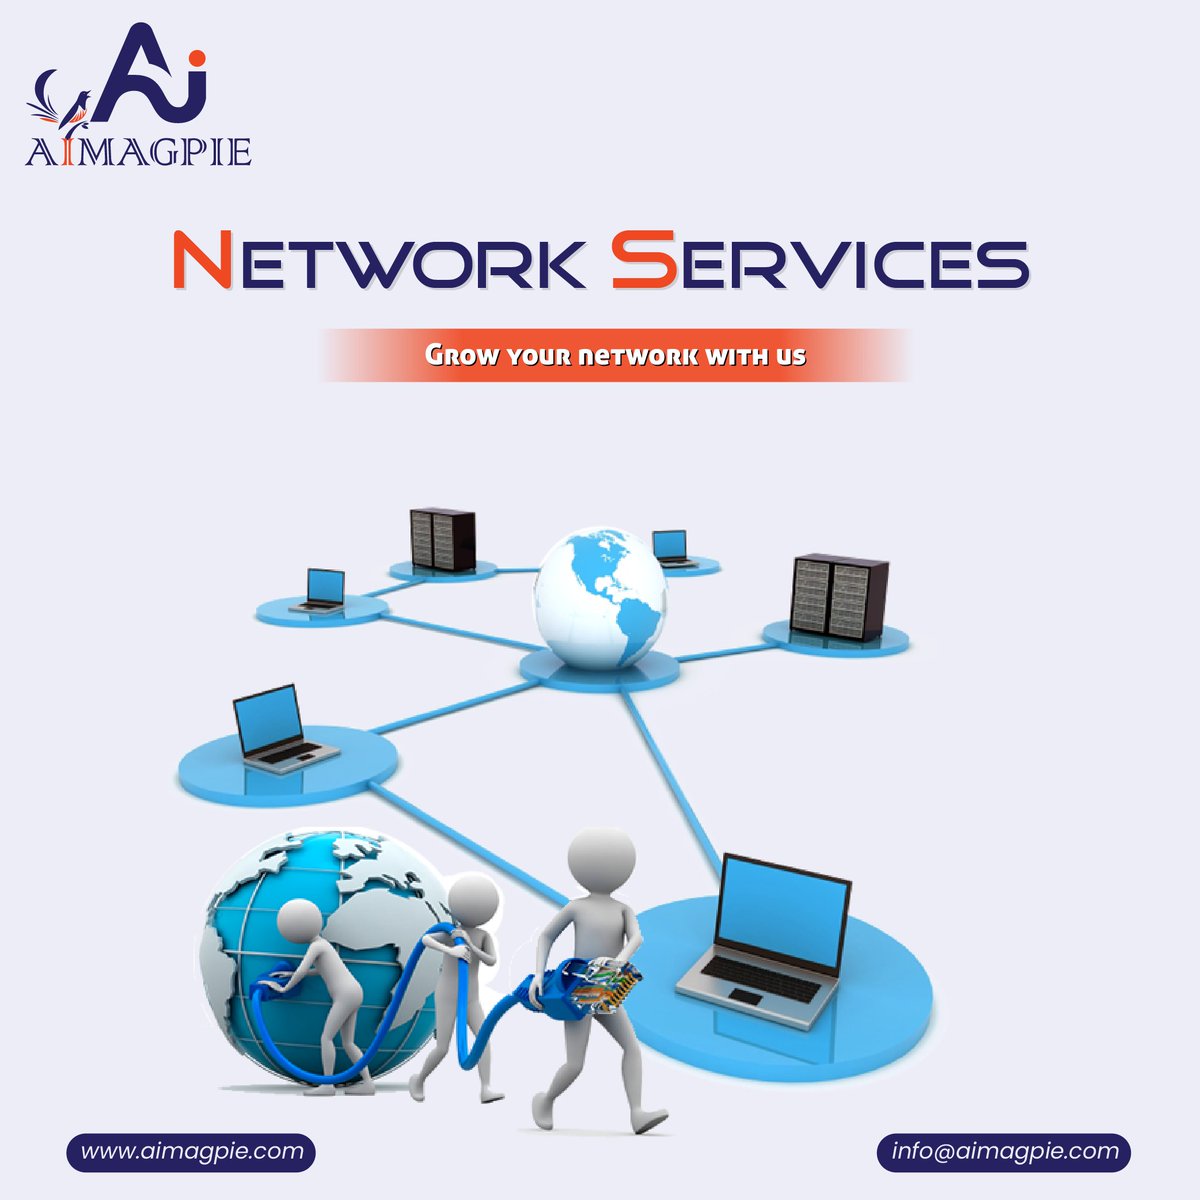 Boost your business with reliable and secure network services, tailored to your needs.
.
.
#vsinfotechaustralia #networkingbusiness #networkingservices